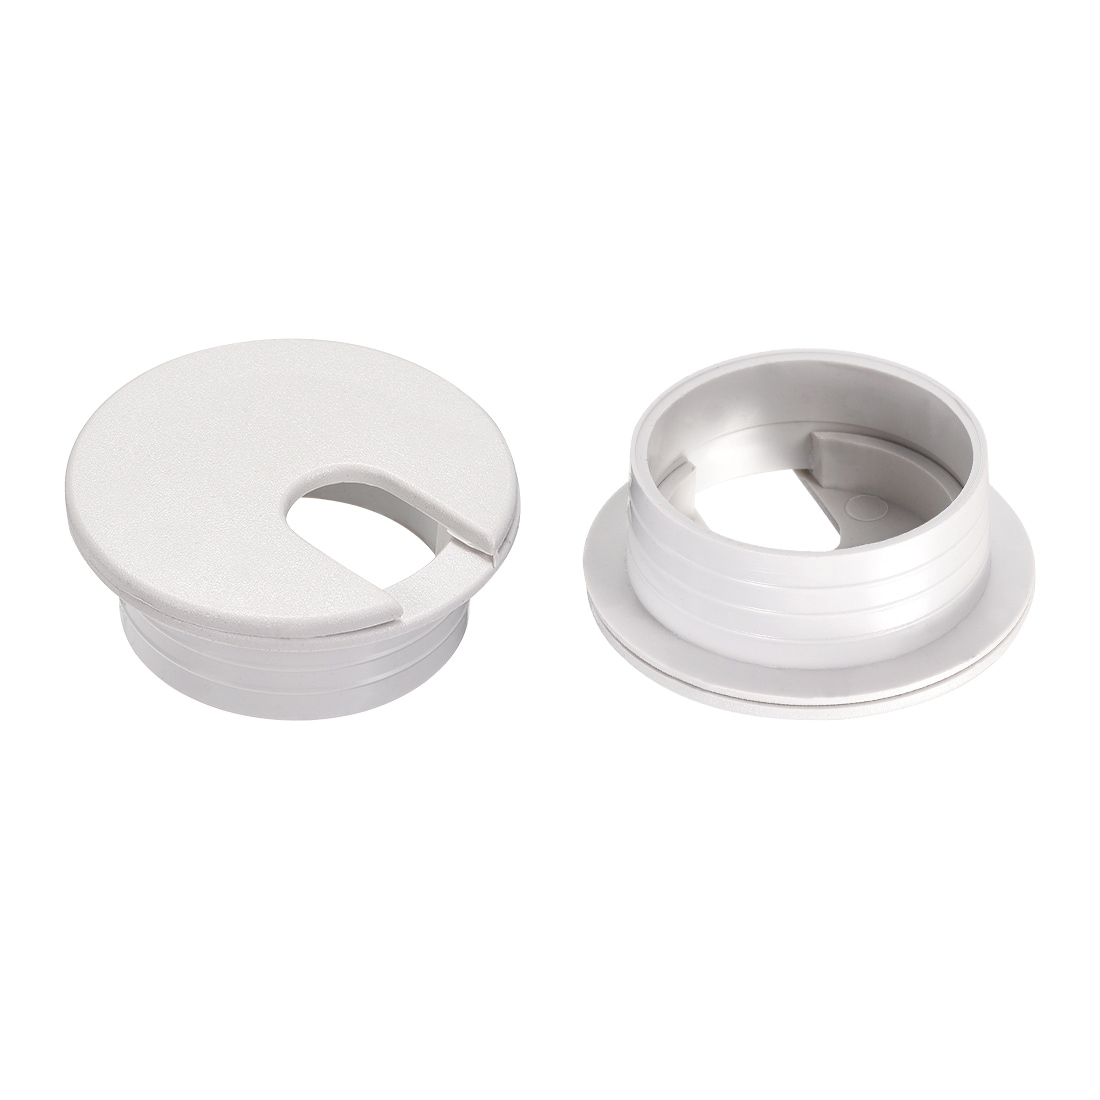 Cable Hole Cover, 2-1/8 Plastic Desk Grommet for Wire Organizer